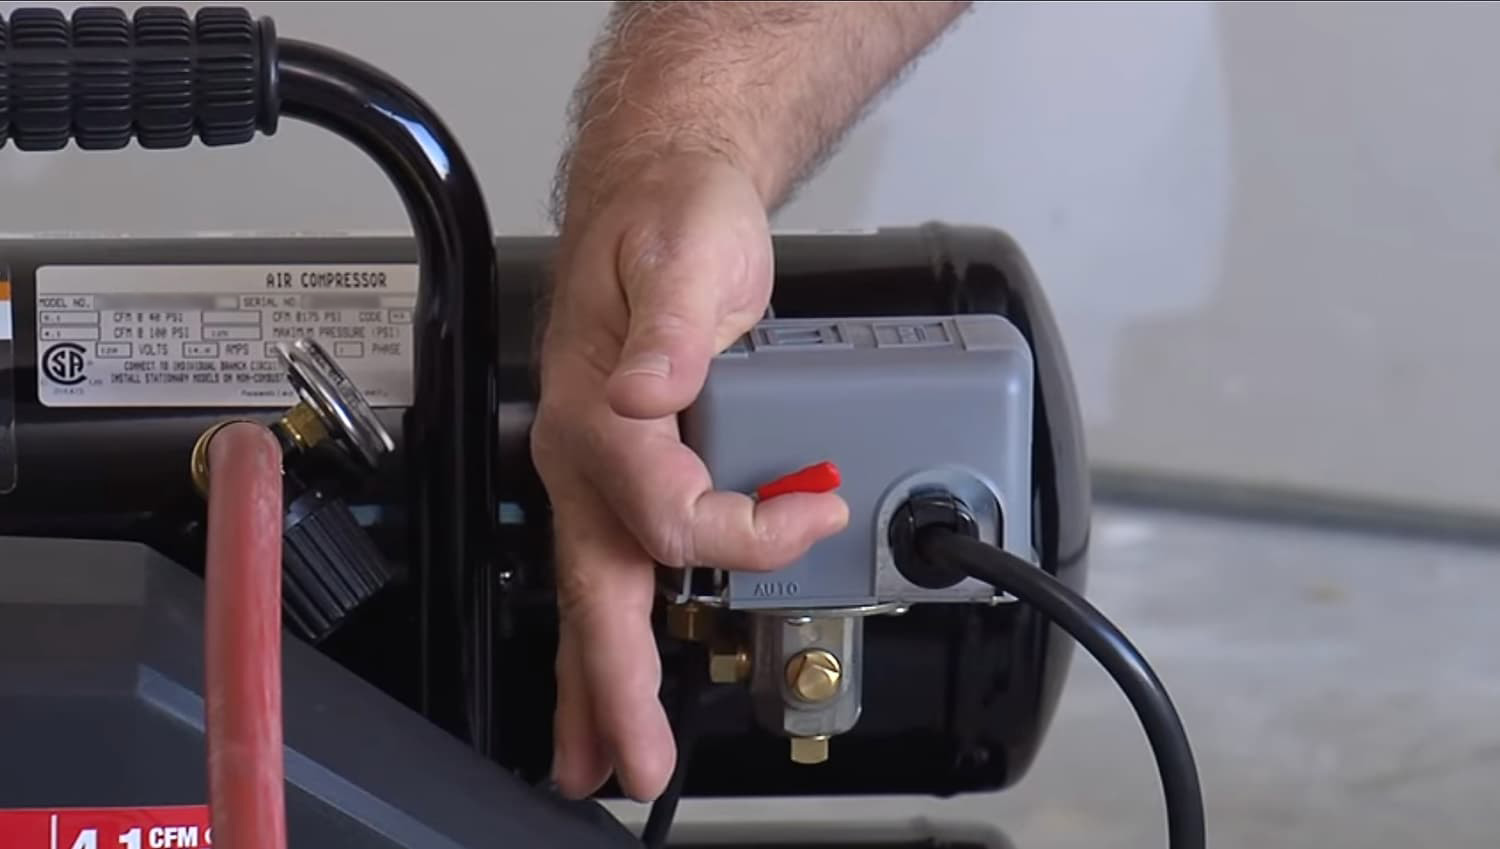 When you are ready to shut the air compressor down, move the lever on the pressure switch to the "OFF" position, unplug the unit and disconnect the air hose.